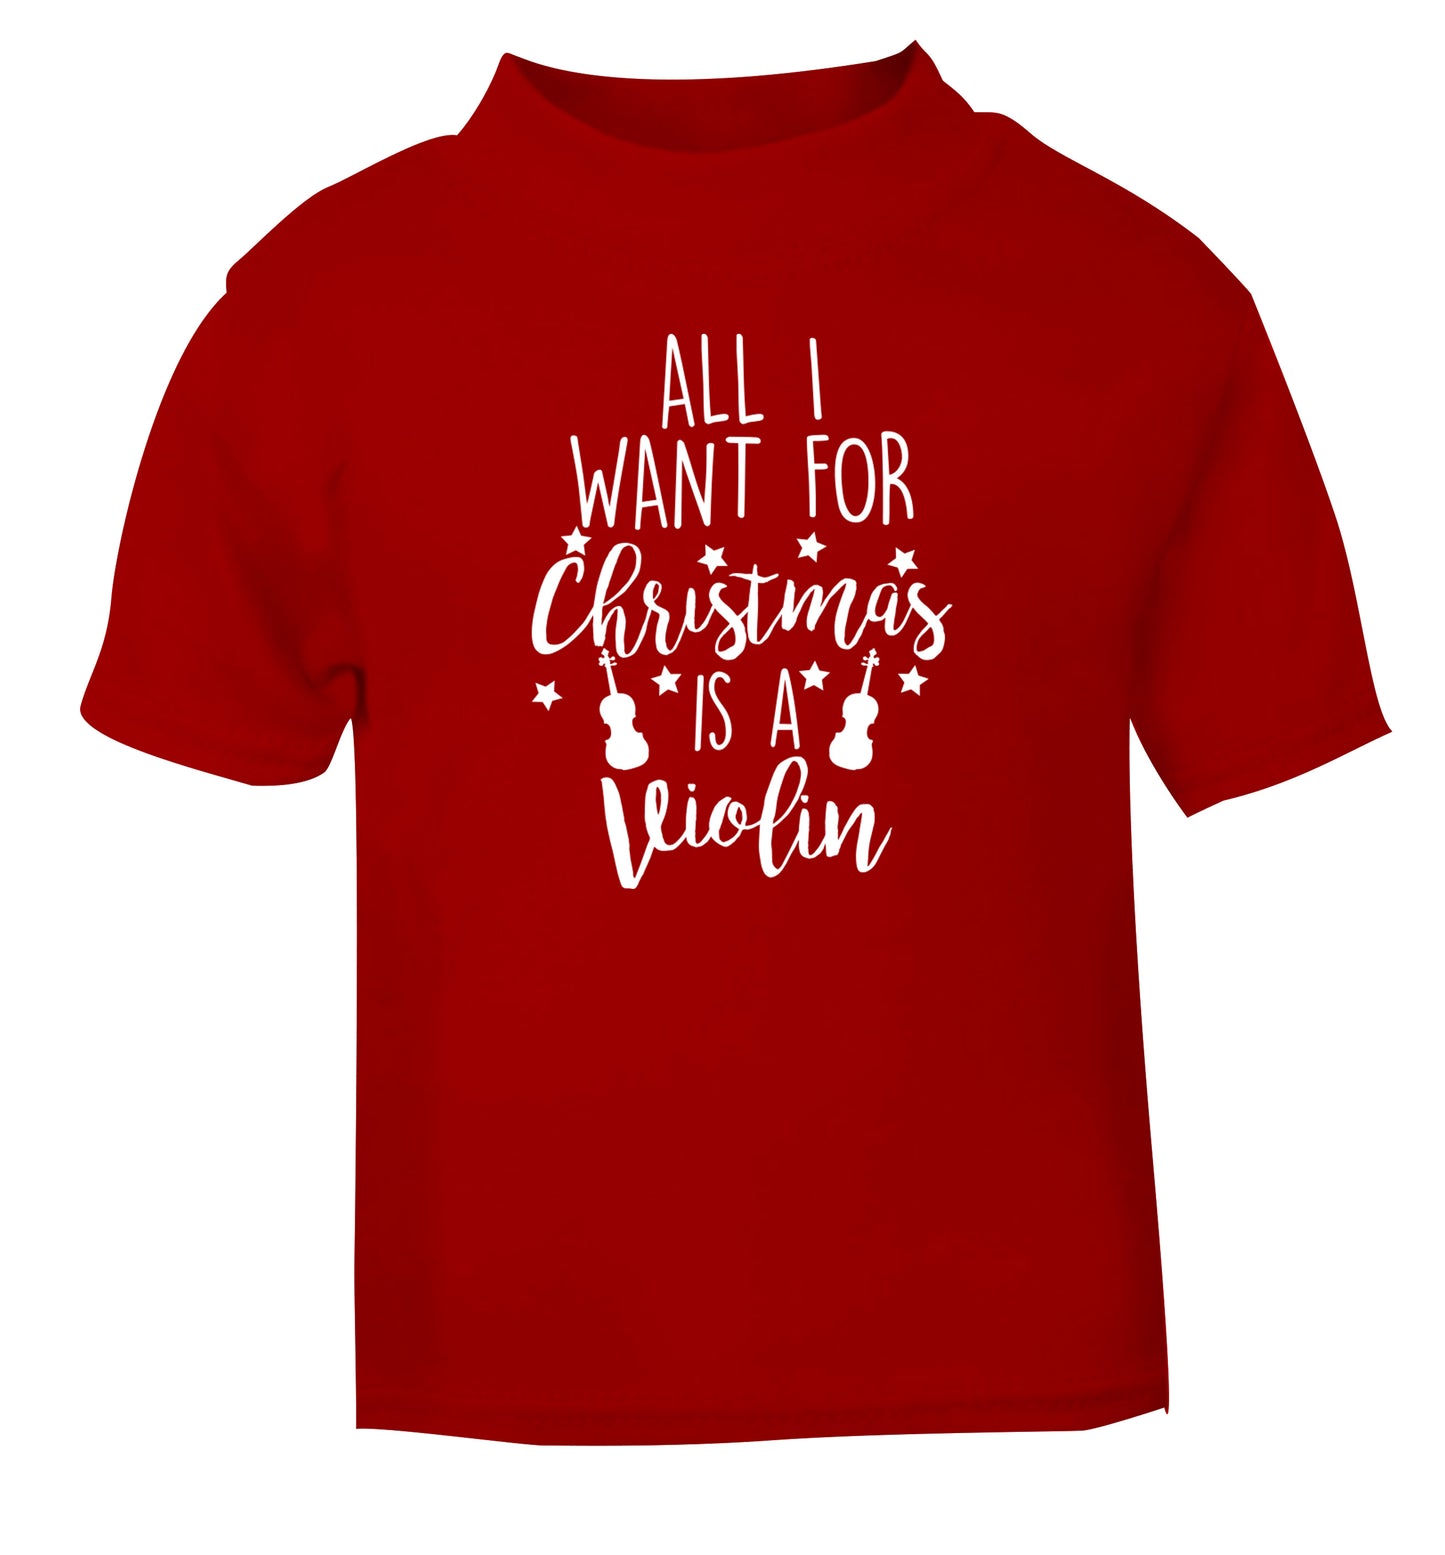 All I Want For Christmas is a Violin red Baby Toddler Tshirt 2 Years